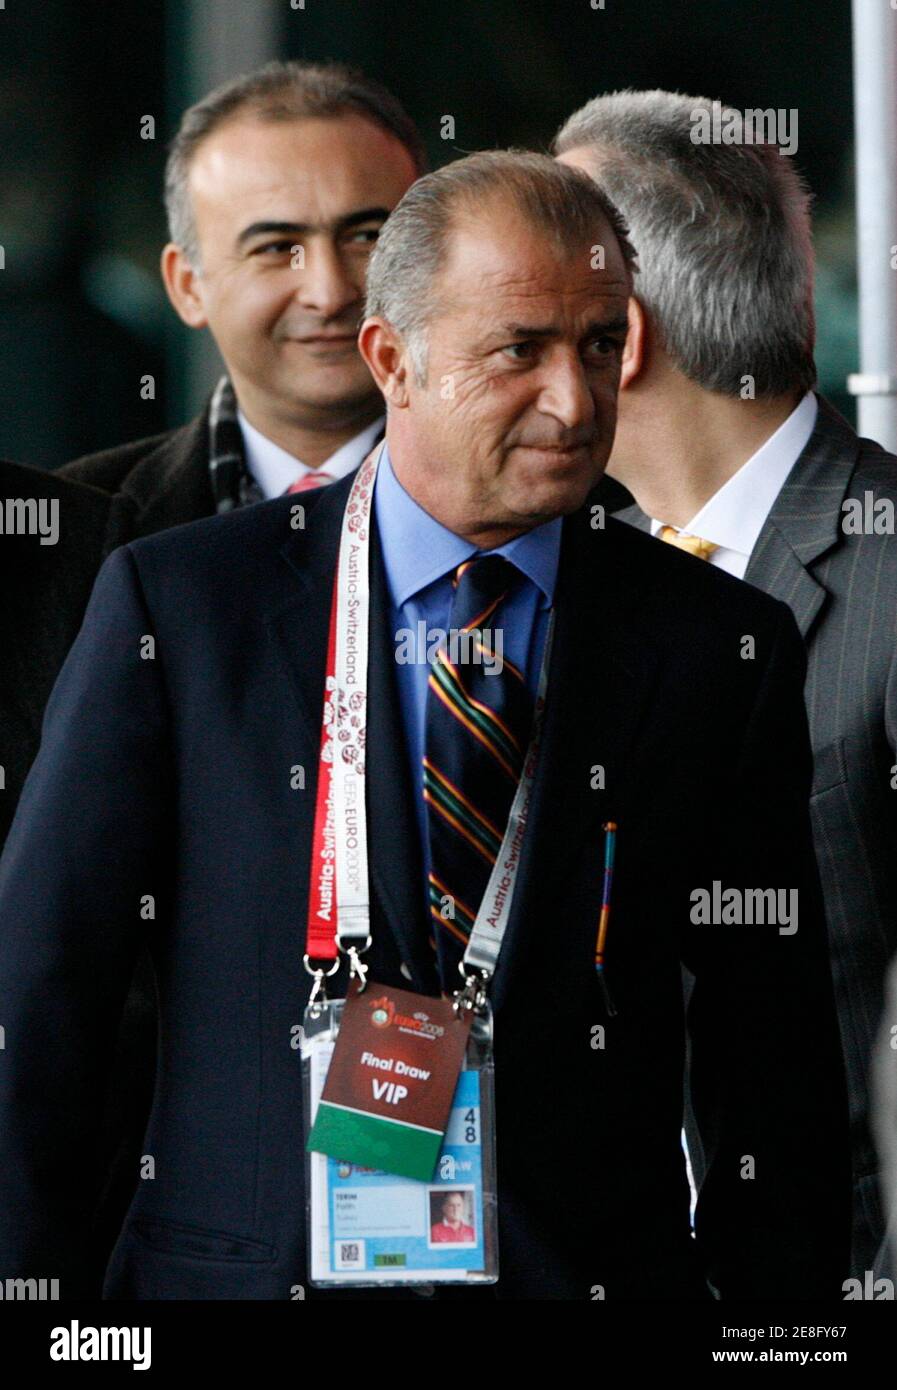 Turkey's national soccer team coach Fatih Terim arrives for the UEFA Euro 2008 soccer final draw in Lucerne December 2, 2007. (EURO 2008 PREVIEW)  REUTERS/Pascal Lauener (SWITZERLAND) Stock Photo